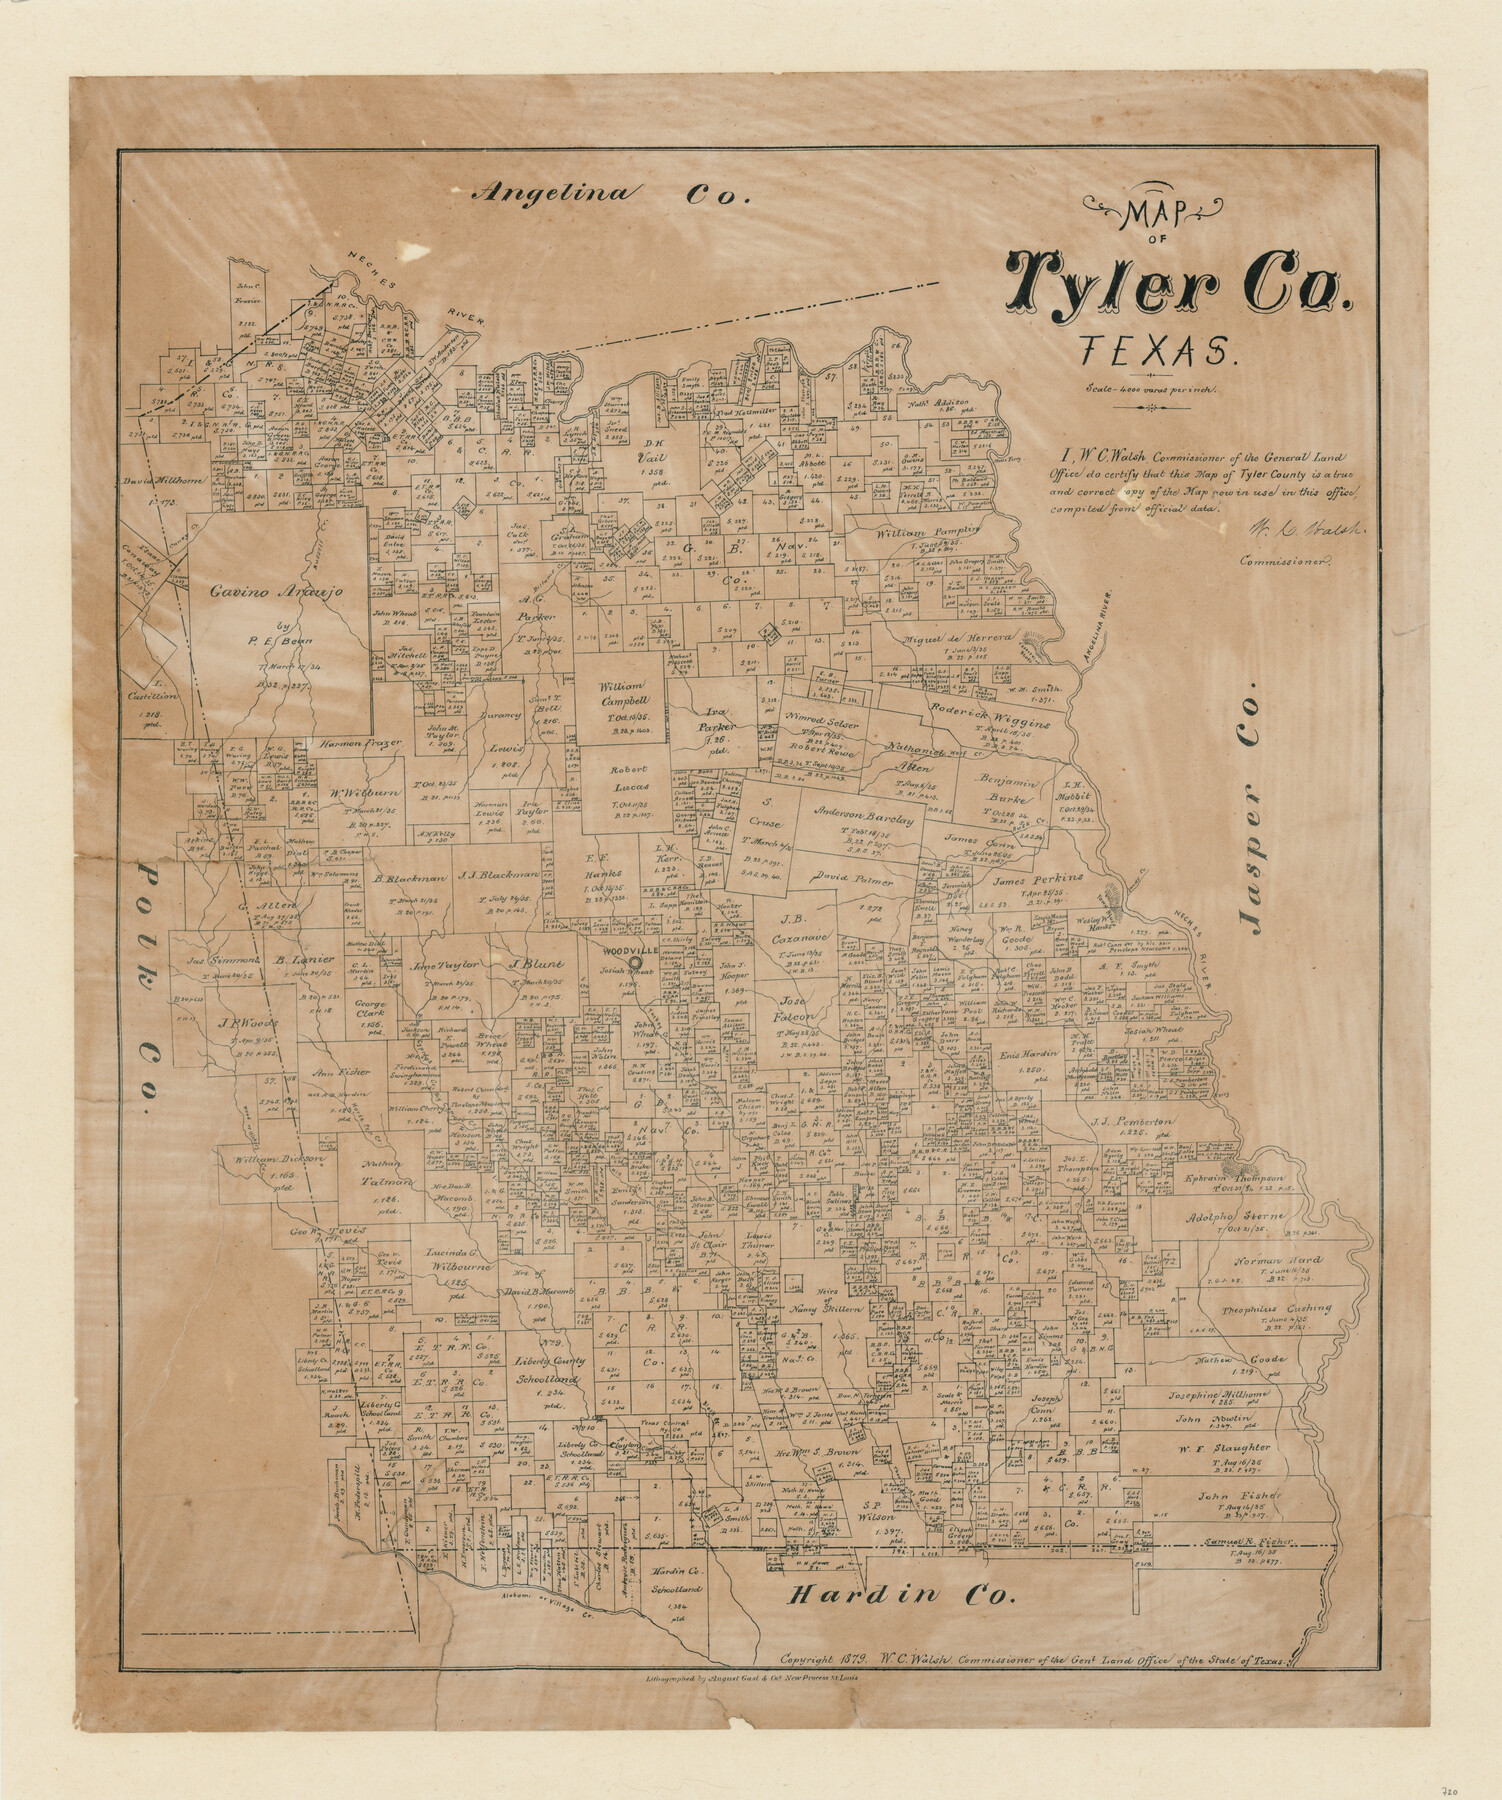 720, Map of Tyler County, Texas, Maddox Collection